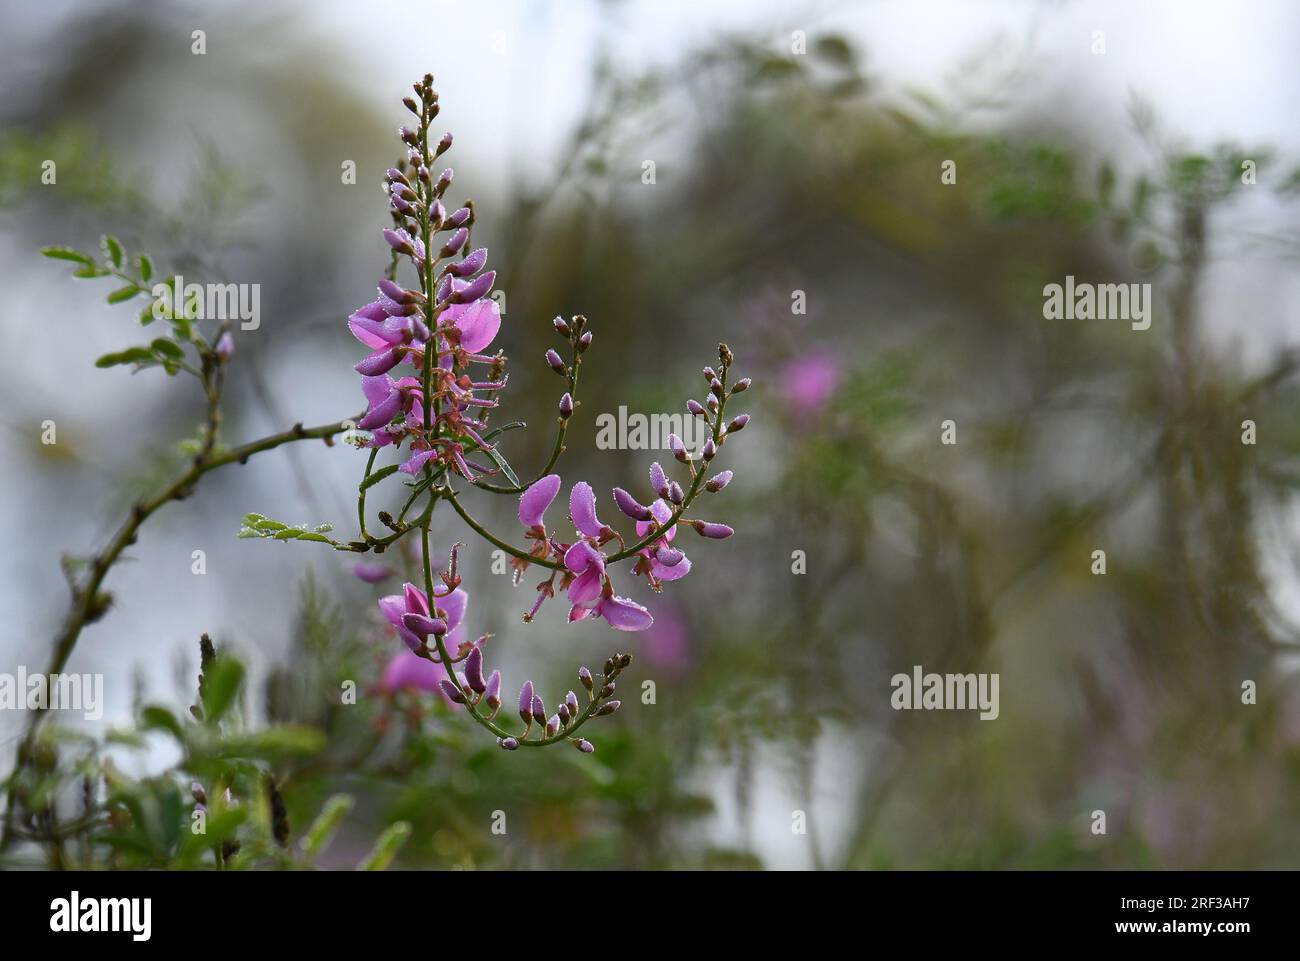 Pink flowers of Australian native Indigofera australis, family Fabaceae, on a frosty wet winter morning in Sydney, New South Wales Stock Photo